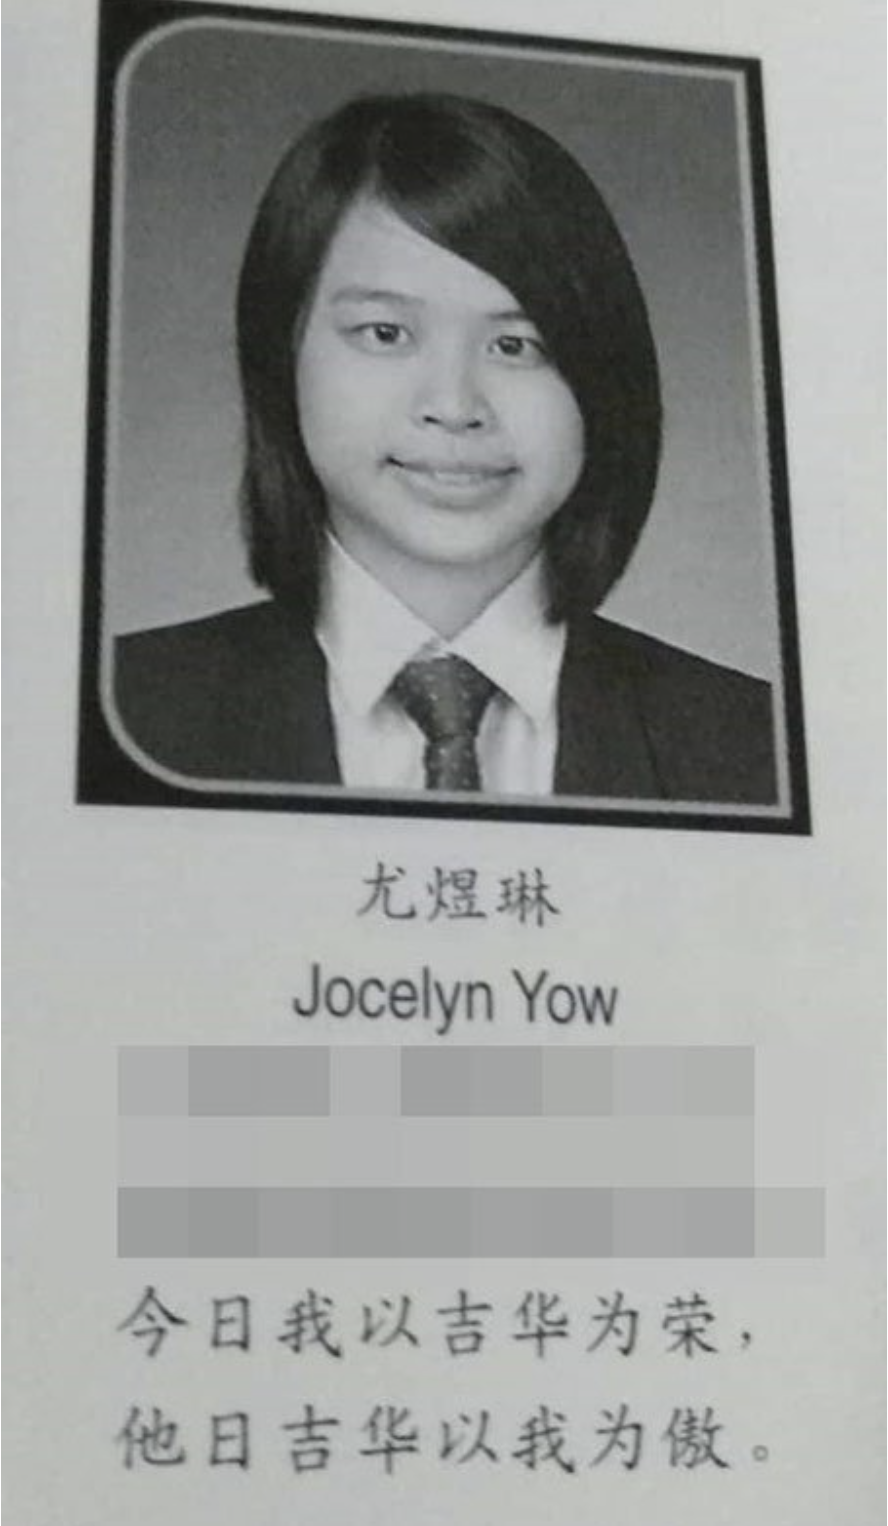 Meet jocelyn yow - the kedahan who is now the youngest mayor of a city in california!